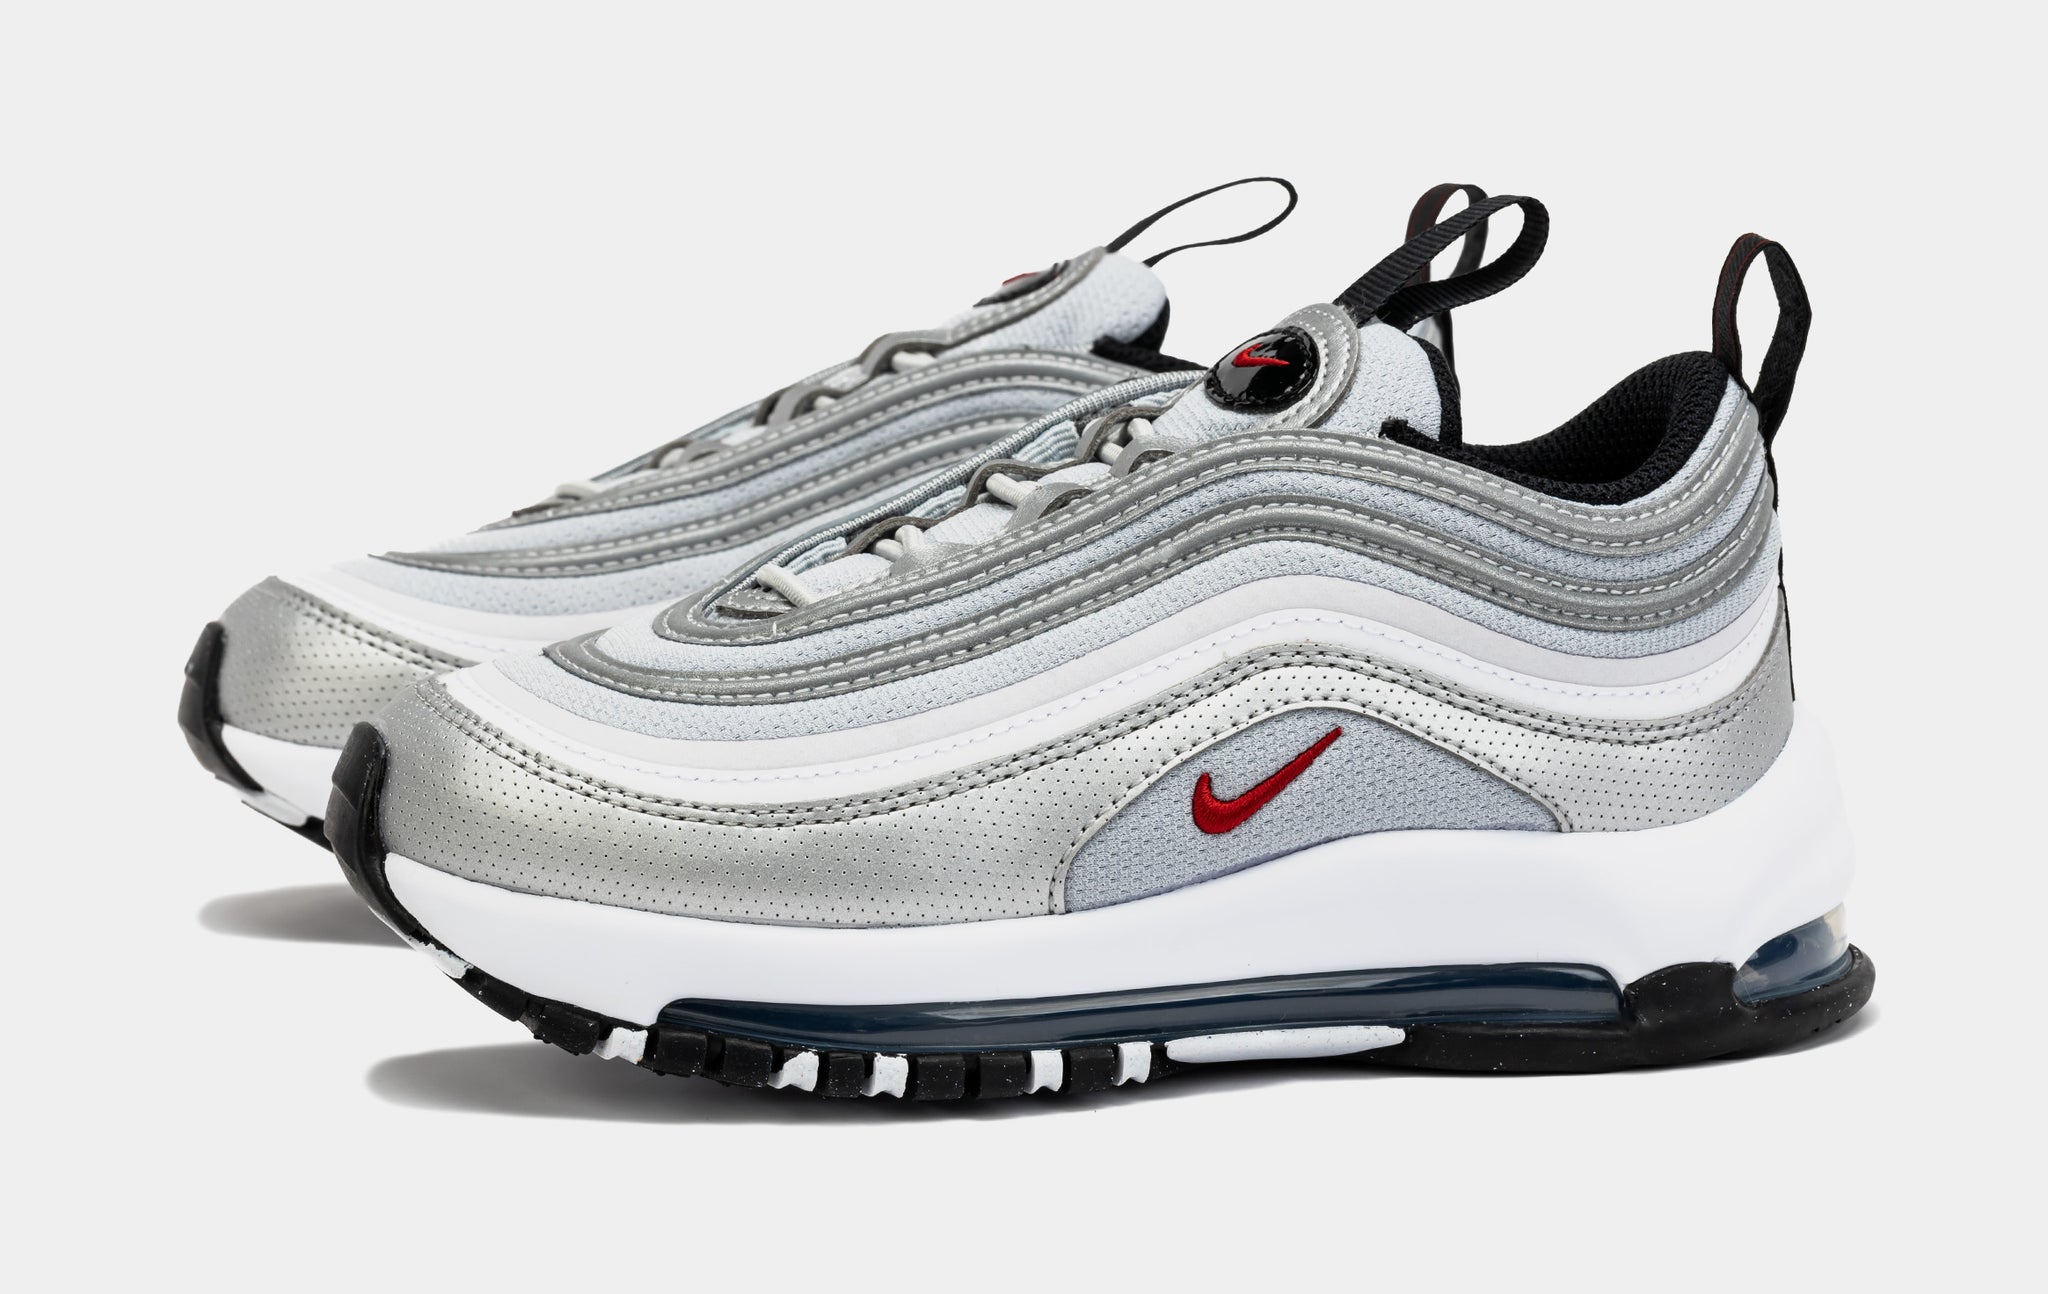 Full-Length Max Air Is Arriving On The Kids Nike Air Max 97 Silver